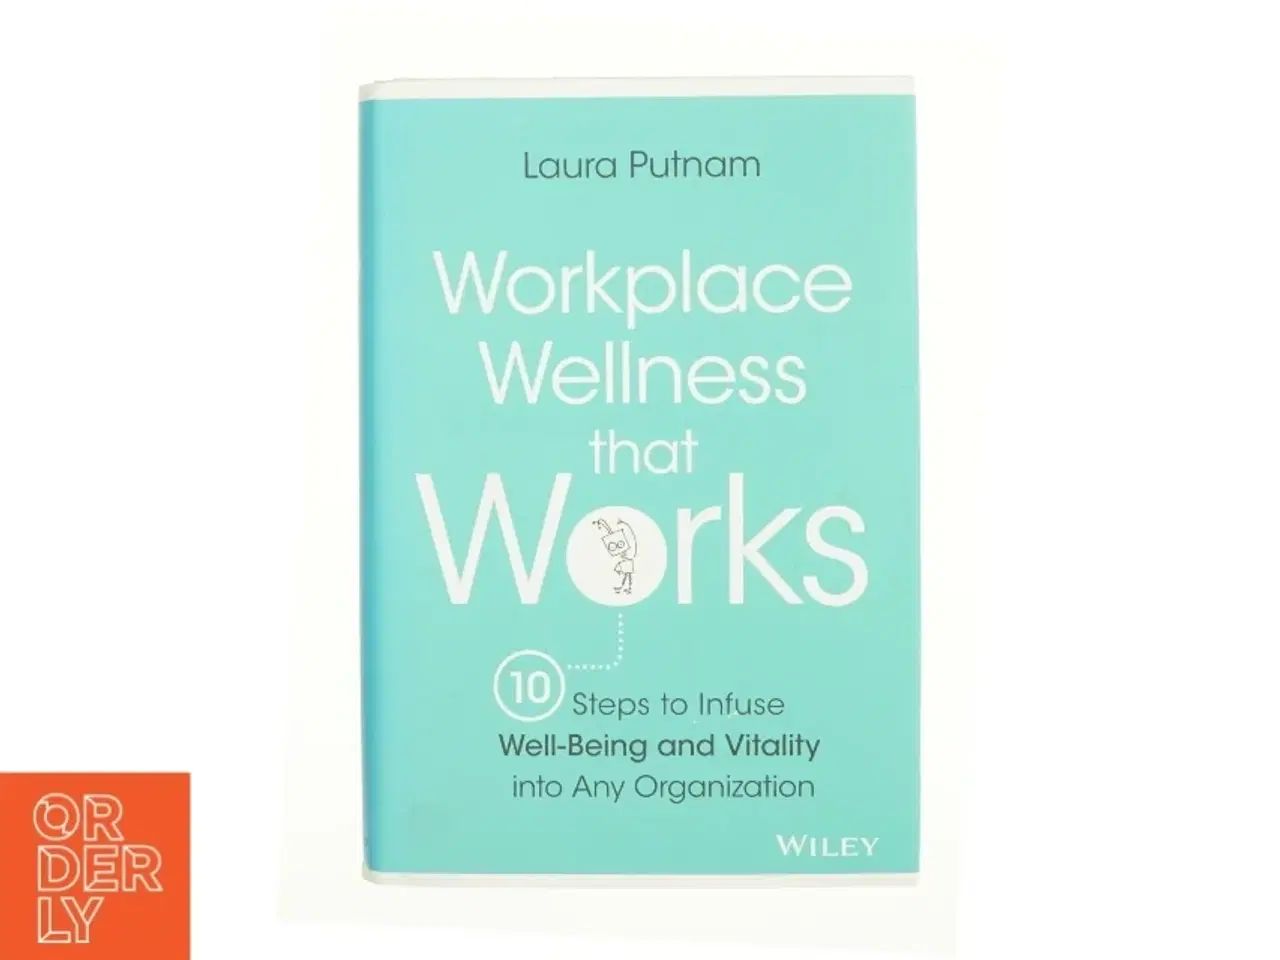 Billede 1 - Workplace Wellness That Works : 10 Steps to Infuse Well-Being and Vitality Into Any Organization (Hardcover) af Laura Putnam (Bog)